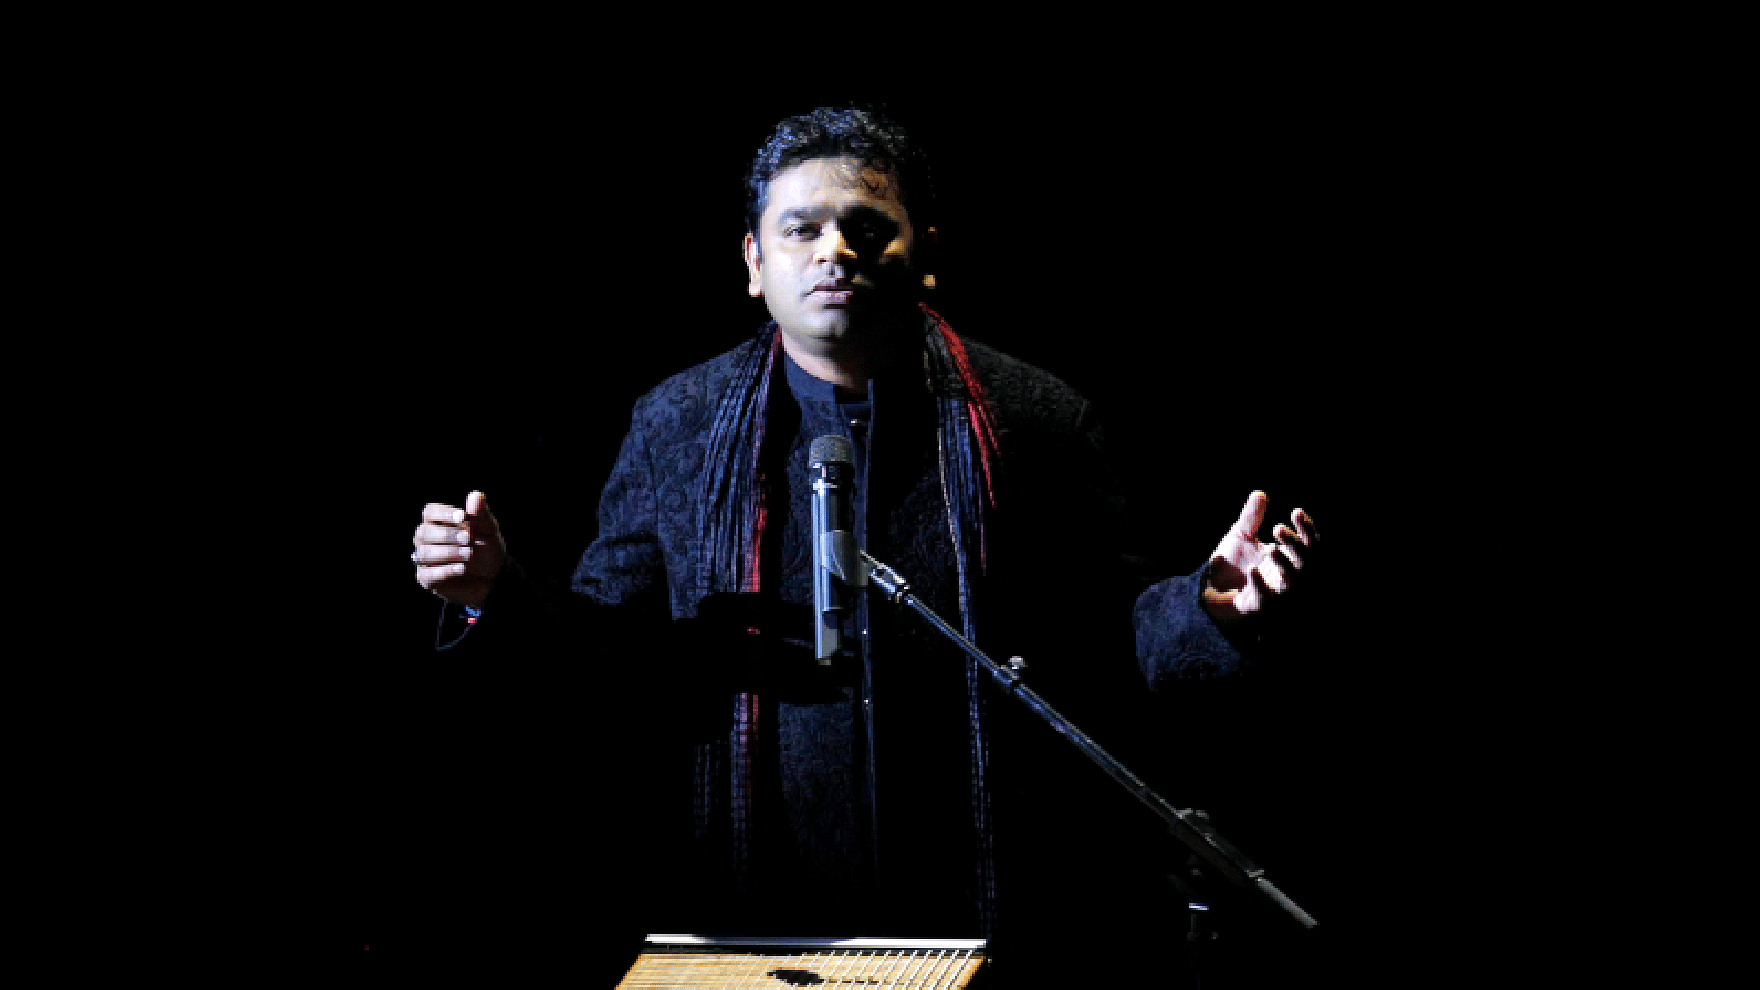 A.R. Rahman has placed Indian film music on the global map like no one else.